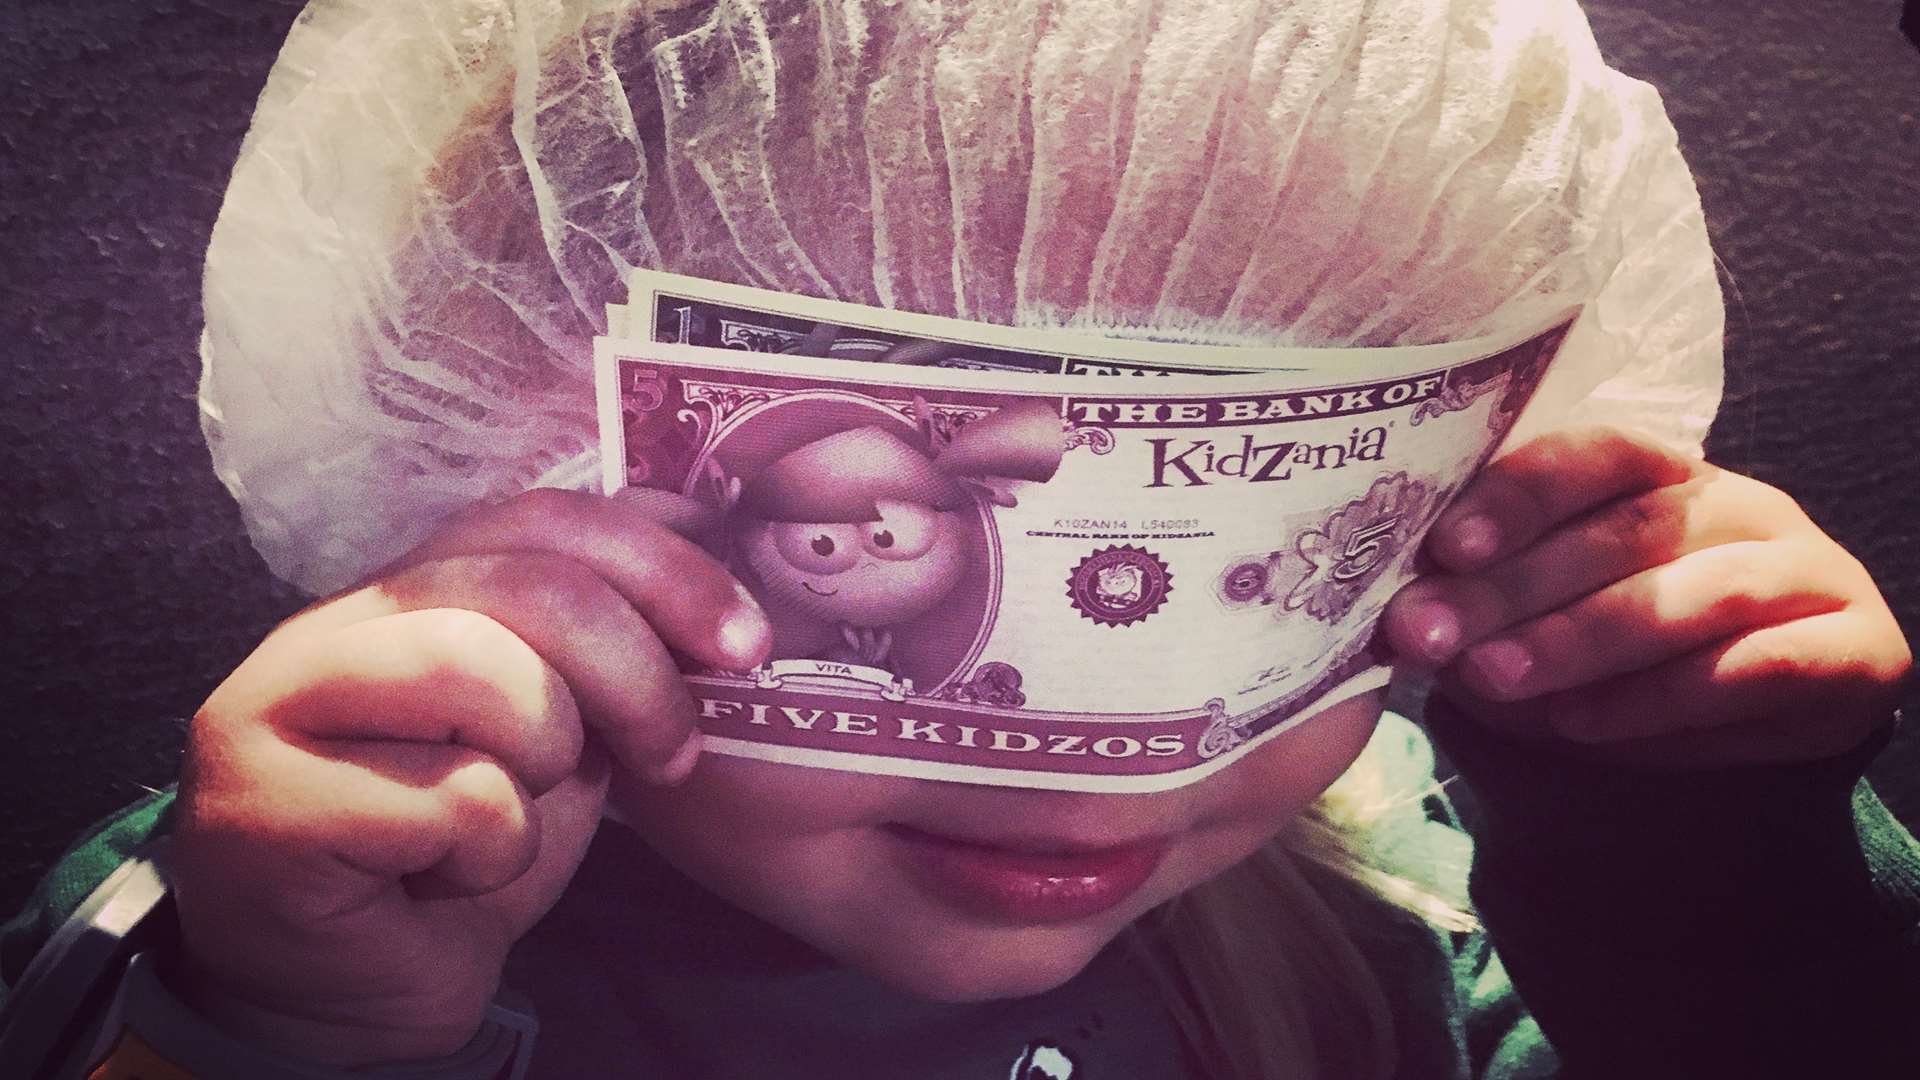 Show me the money - and let me spend it! (Complete with hairnet for chocolate factory visit).